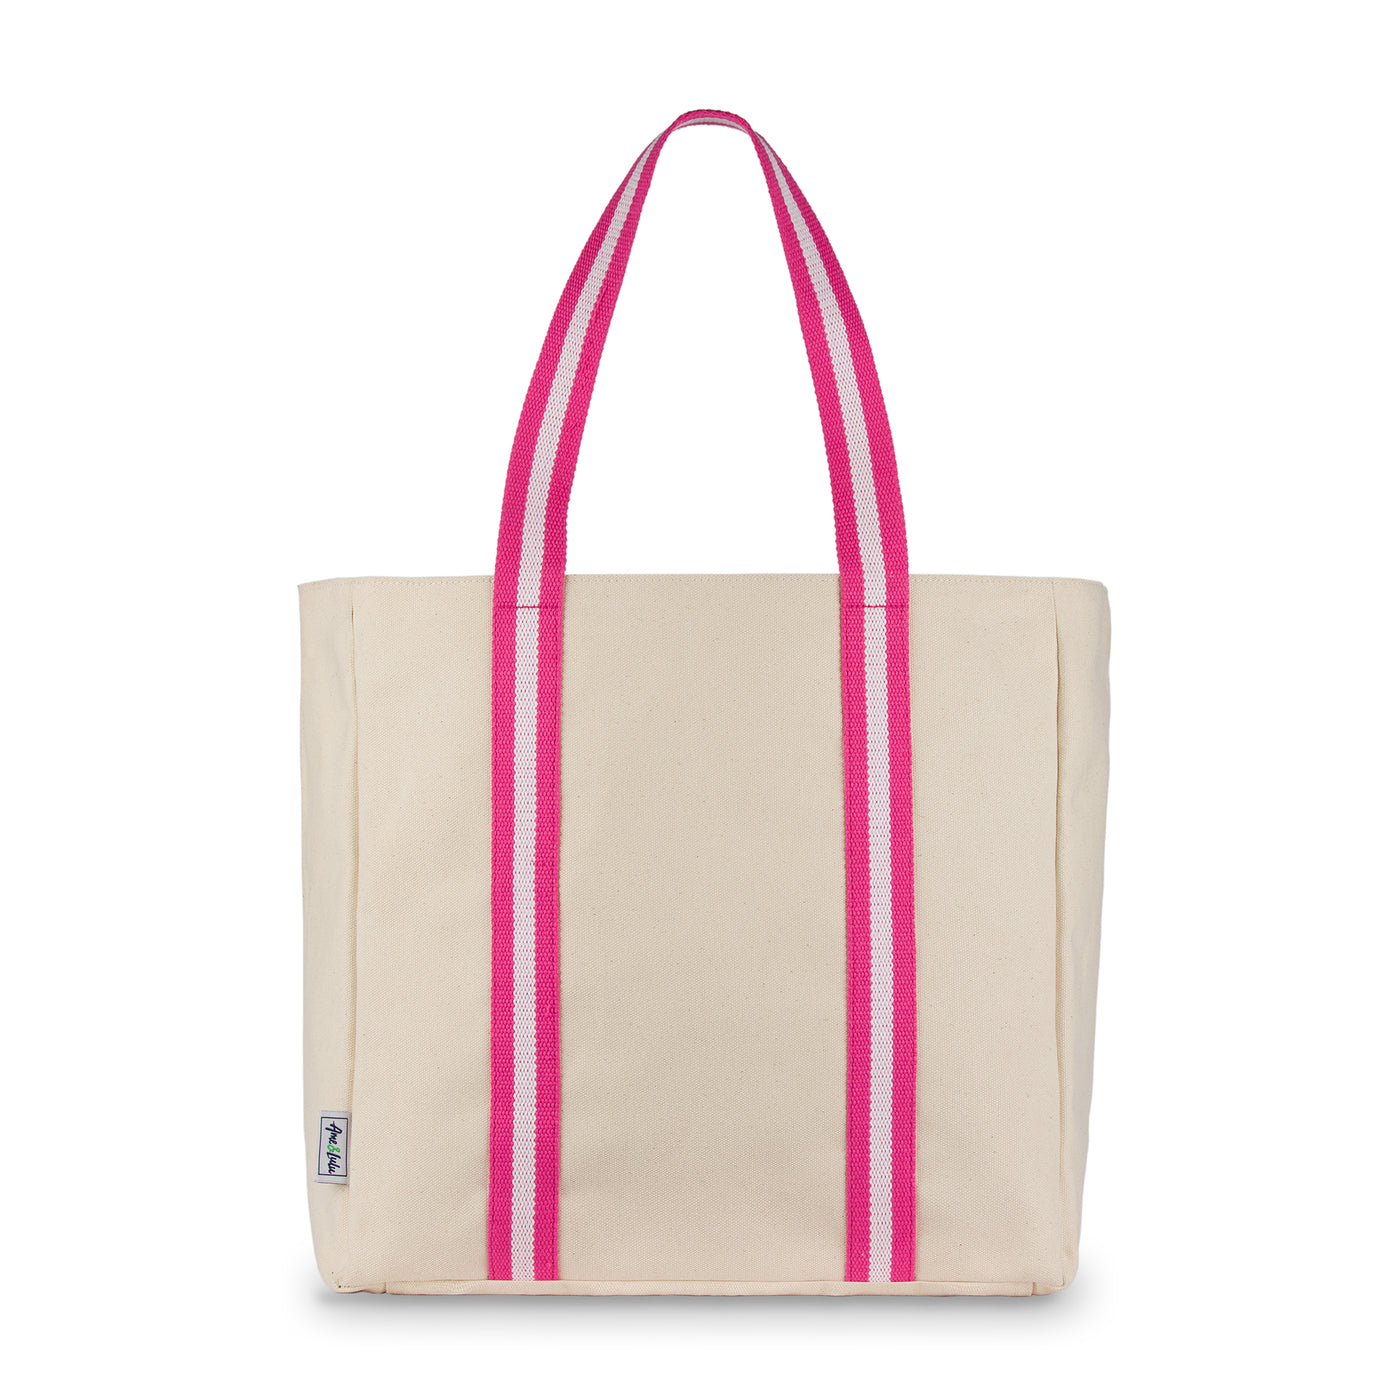 natural canvas tote with hot pink and white cotton webbing straps